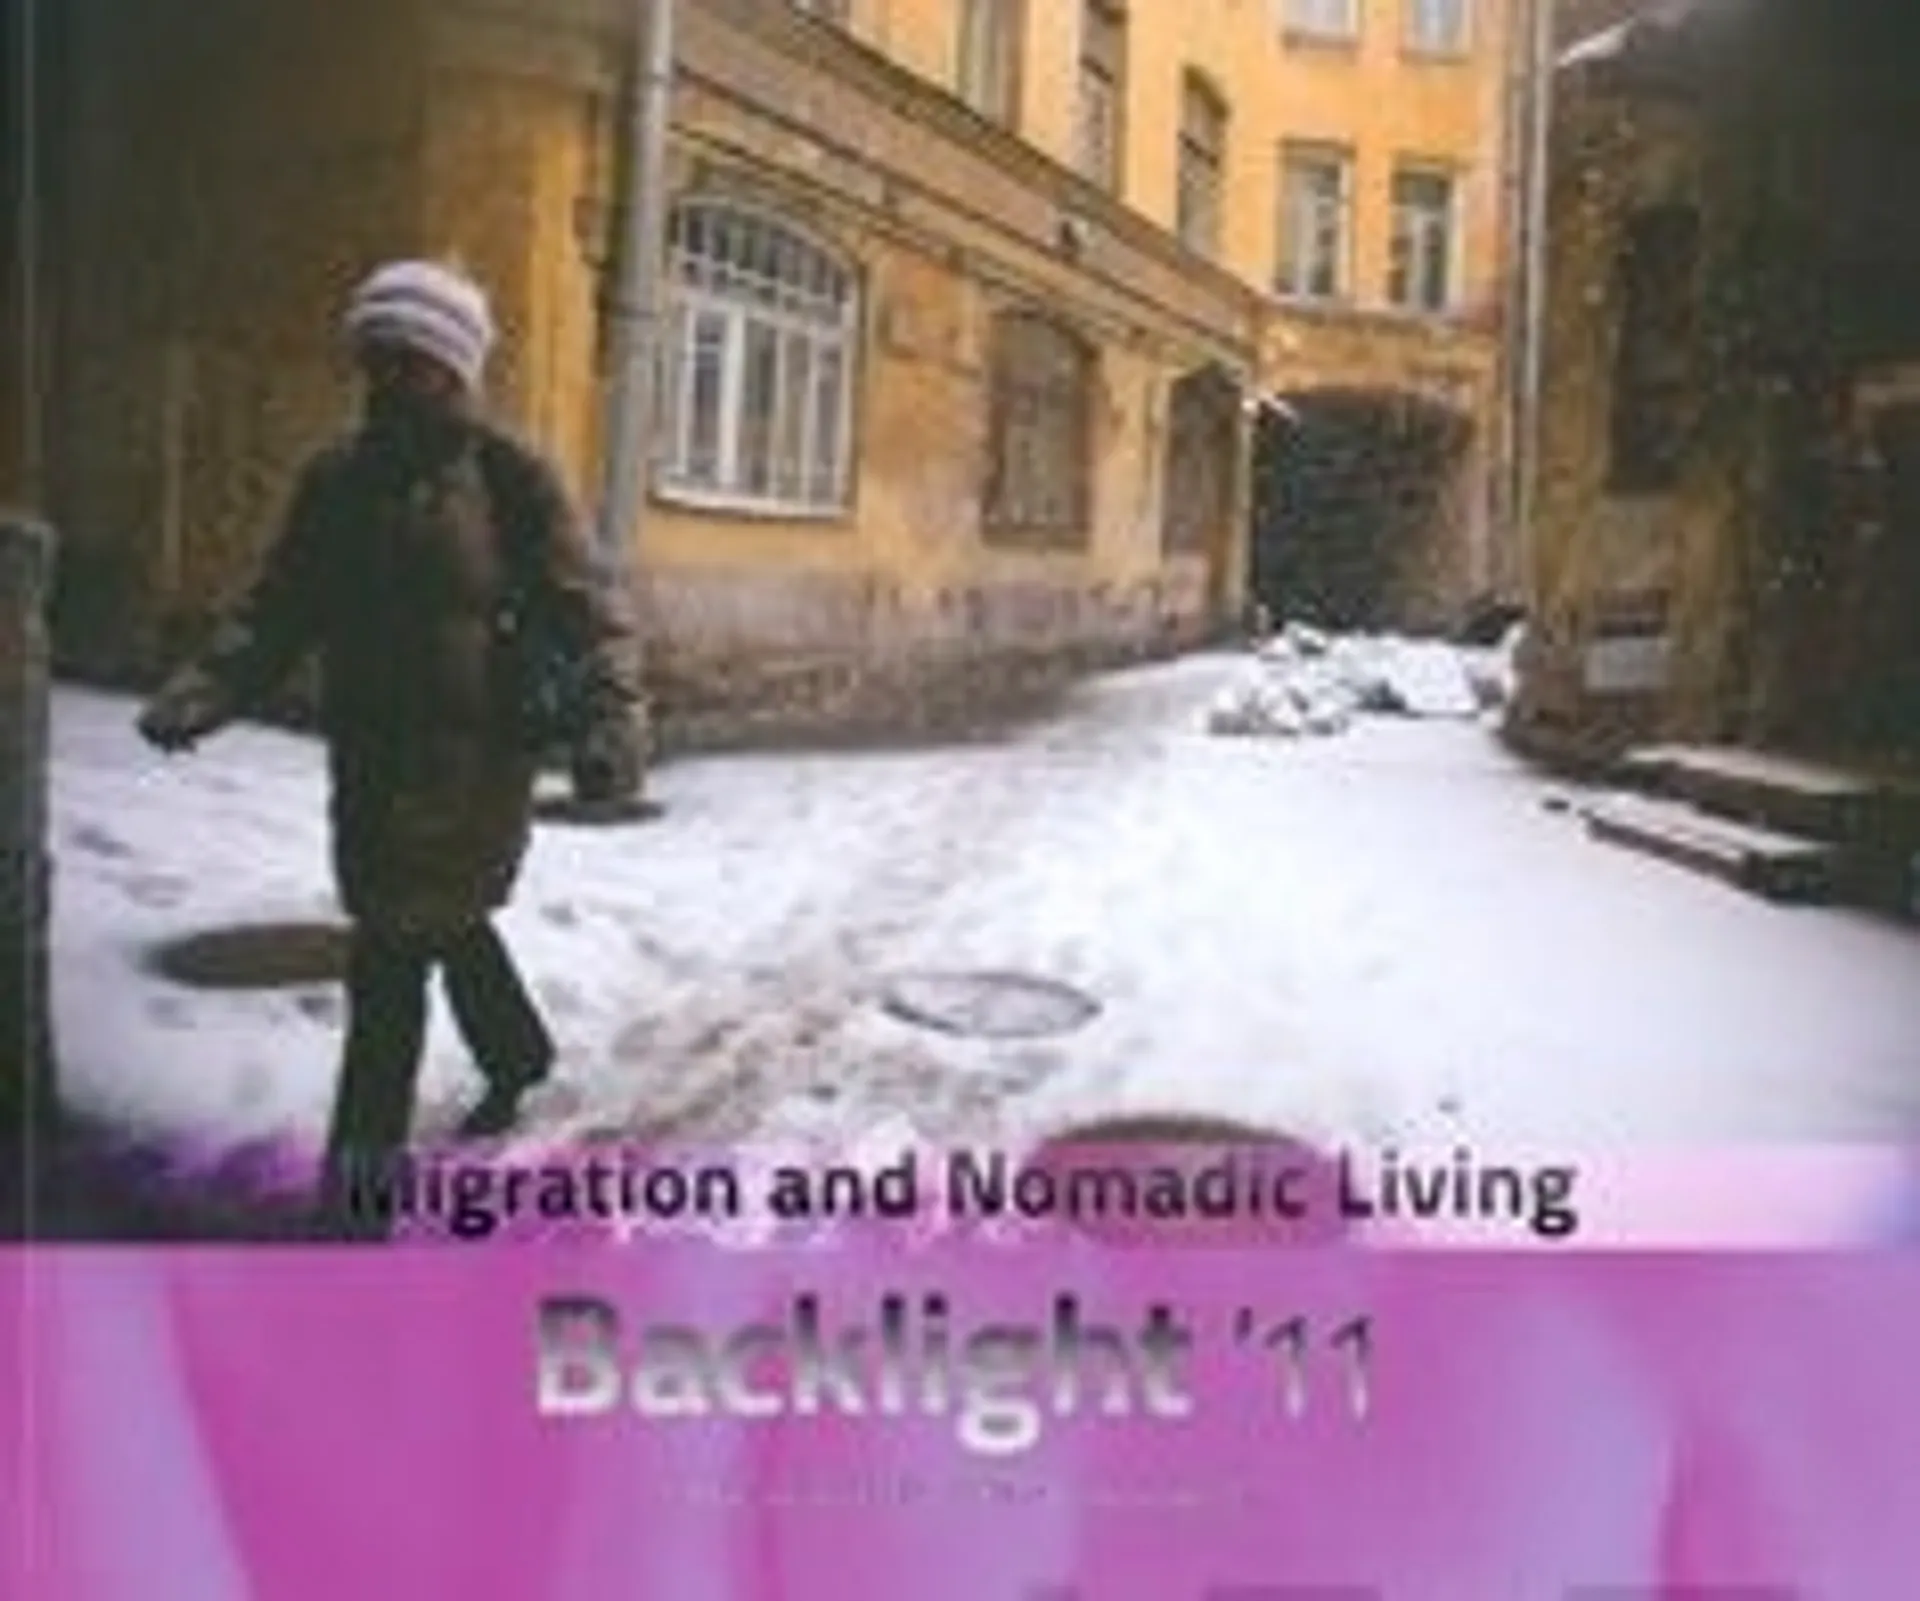 Haas-Pursiainen, Backlight 2011 - migration and nomadic living : 9th international Photo Festival in Tampere